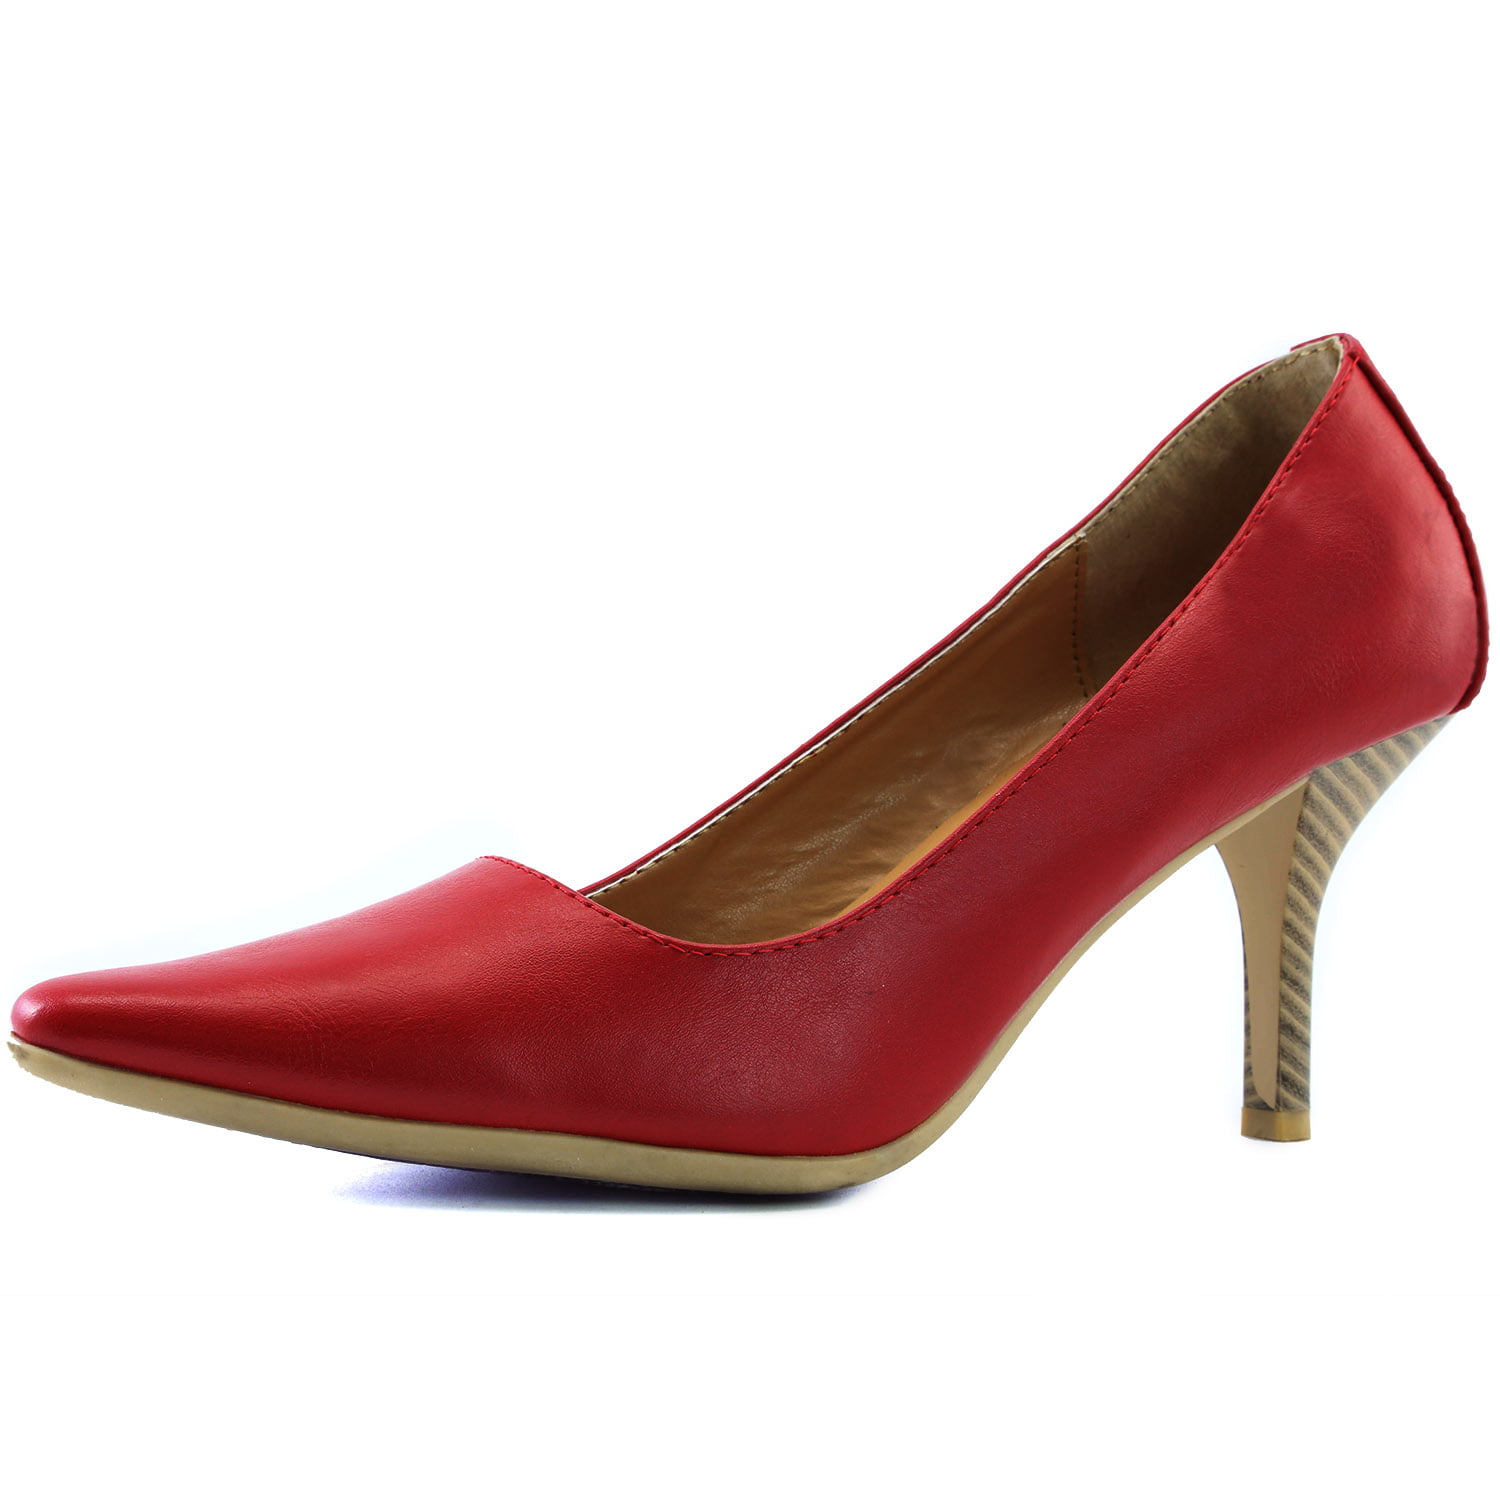 Low Heel  Women's Pointed Toe Pump Comfort Patent Shoes HOT 